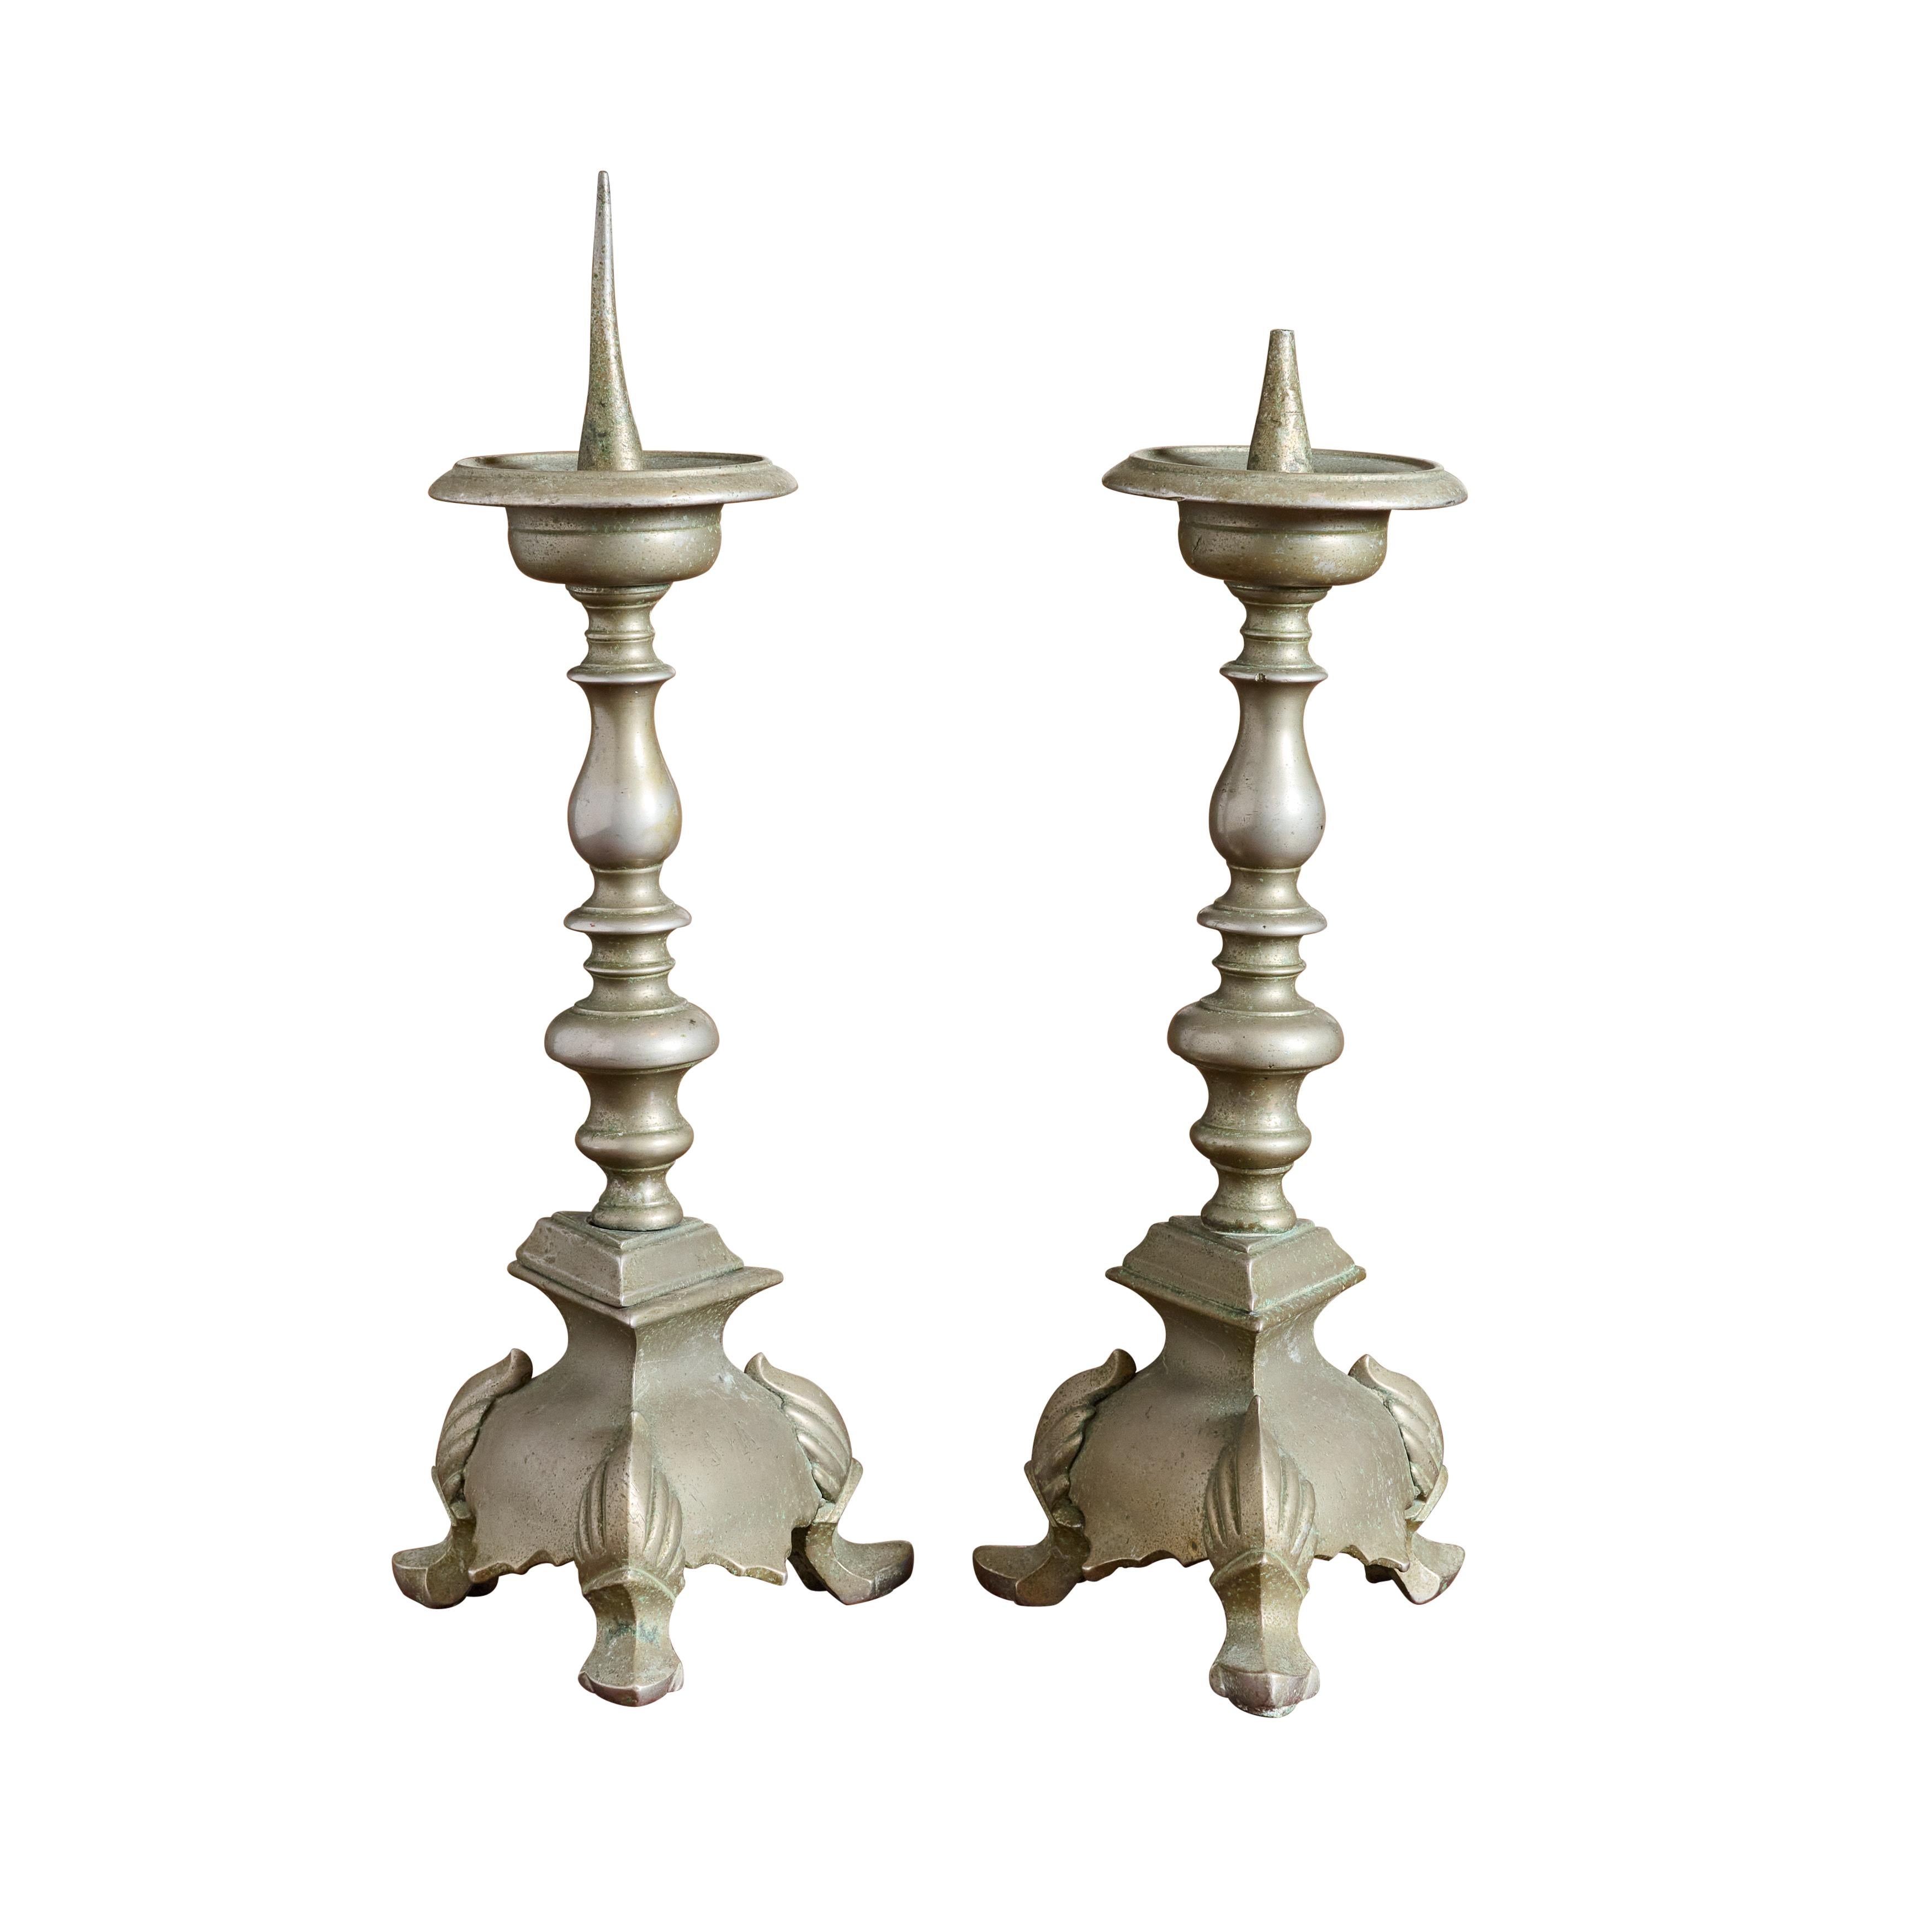 Pair of very old candlesticks with inscriptions. Great quality.

